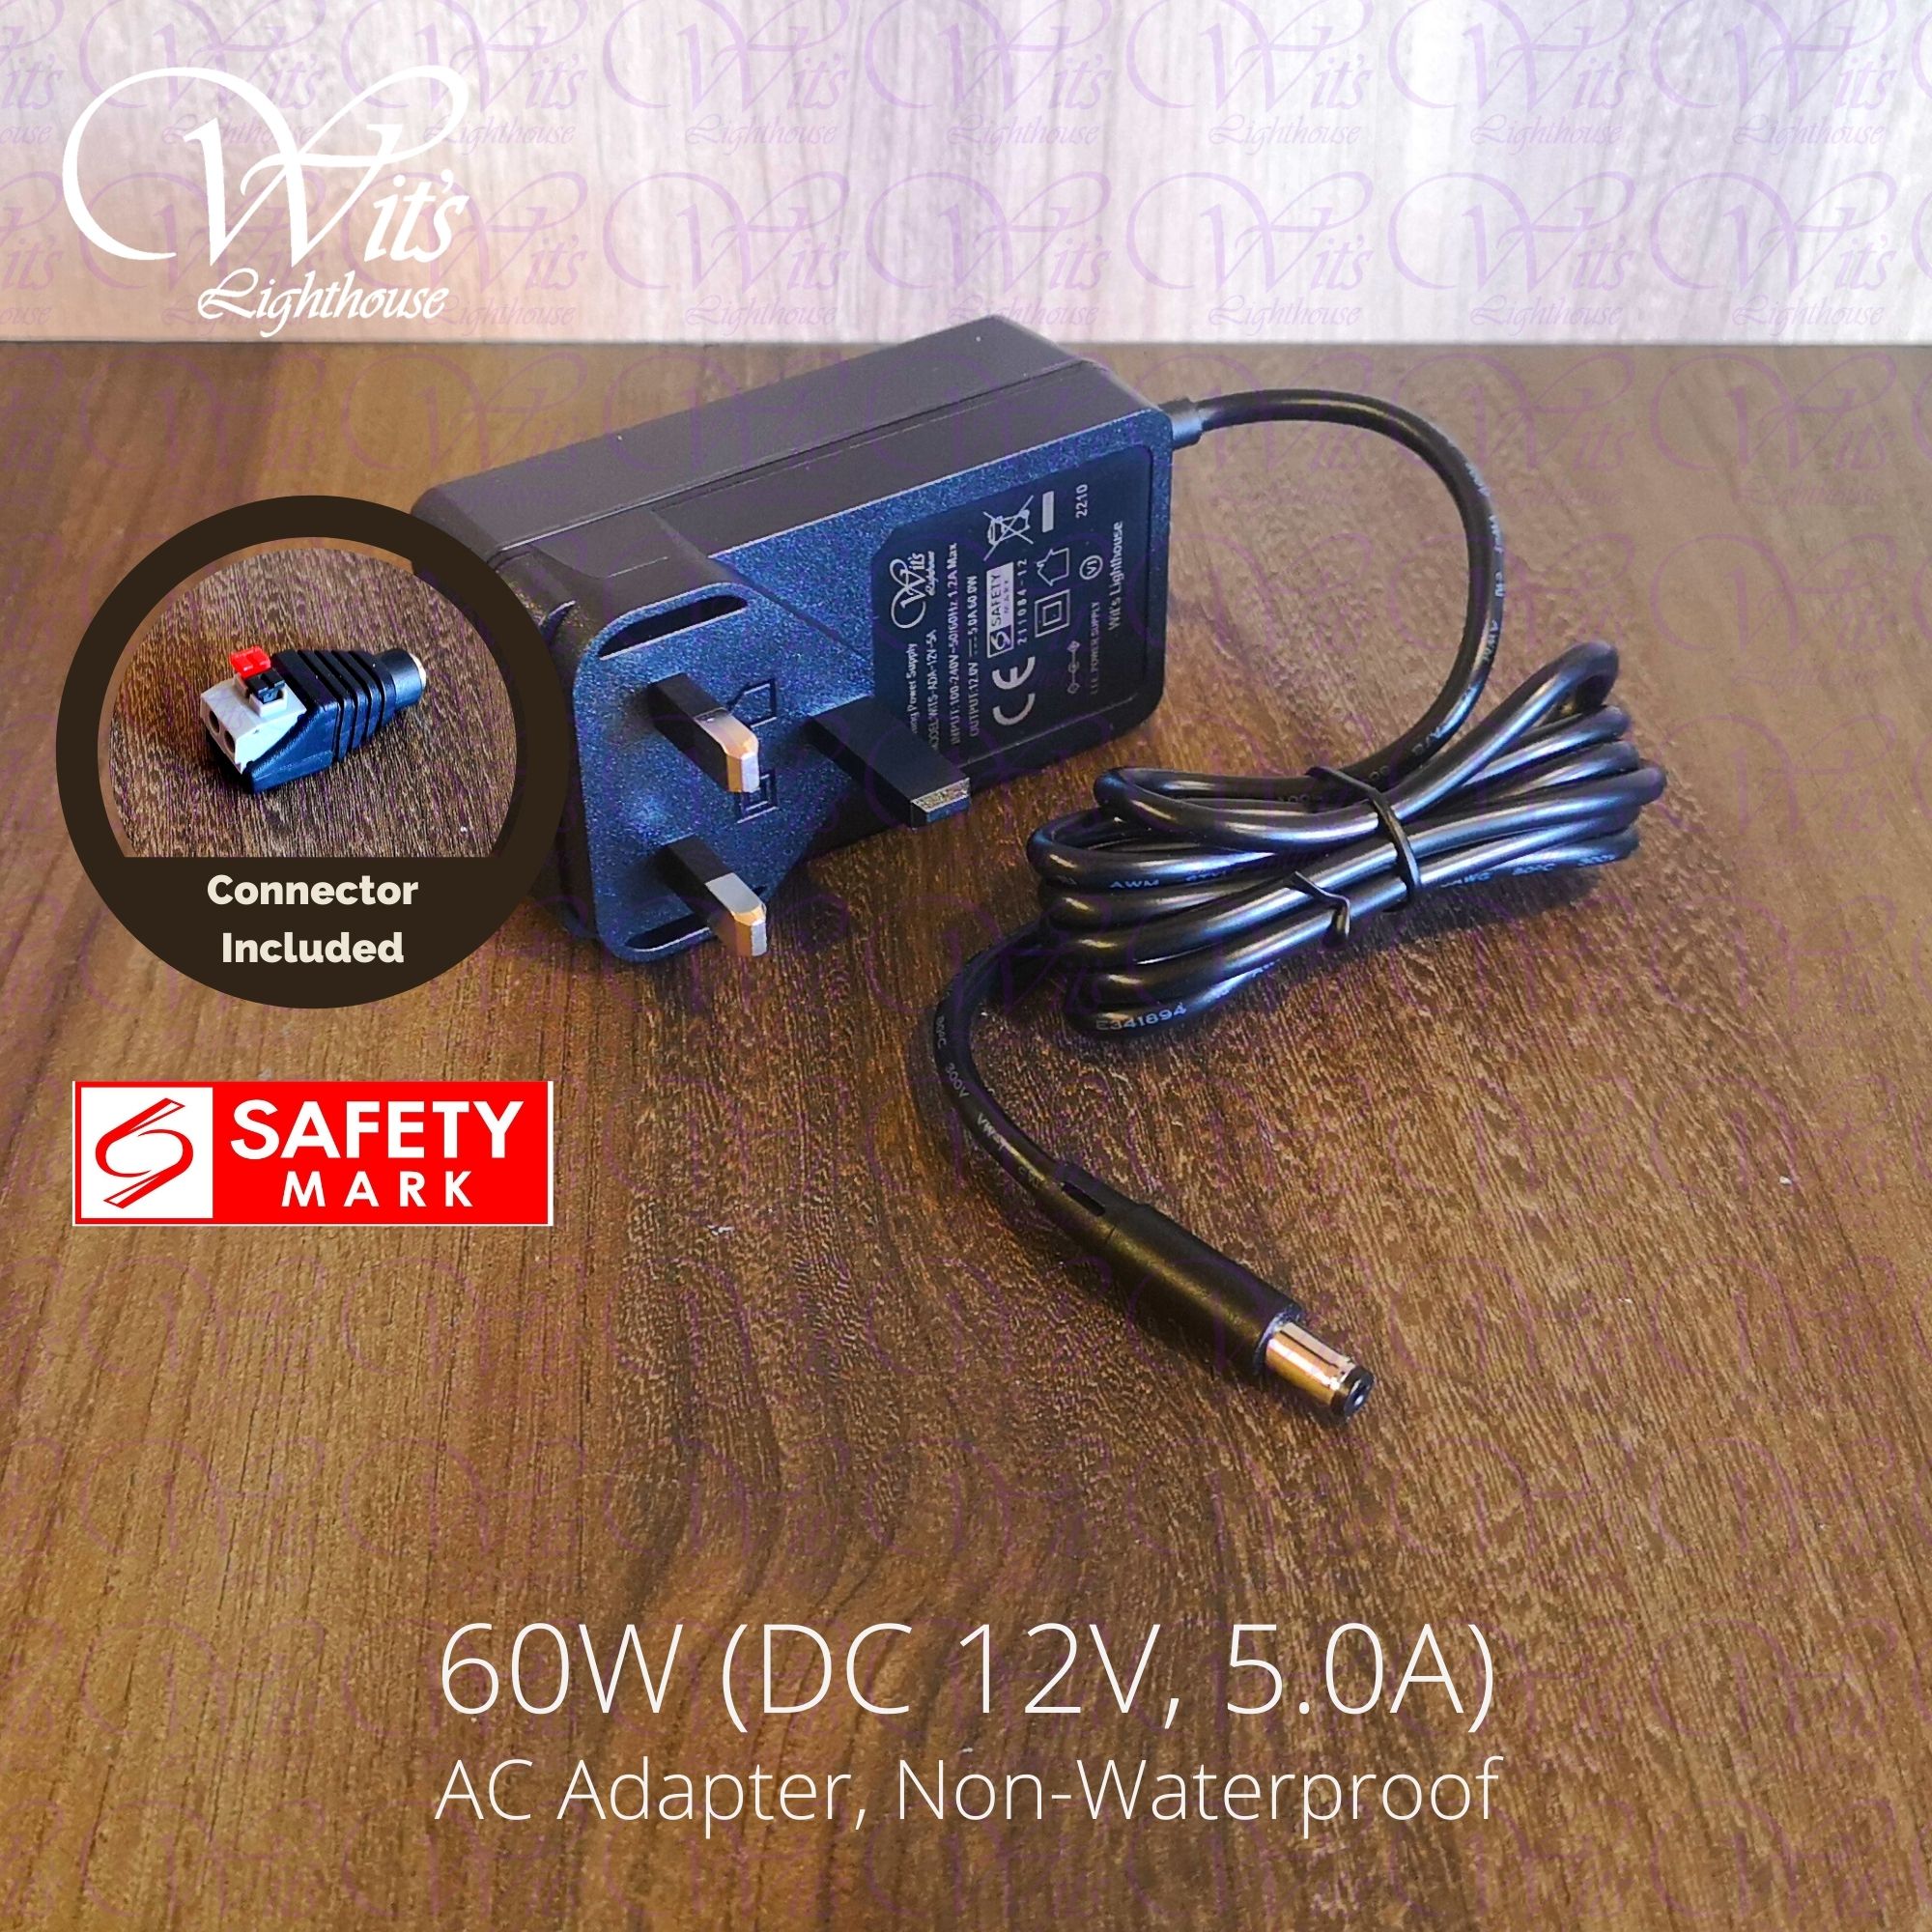 AC 100-240V to DC 12V 5A Power Supply Adapter Switching 5.5mm x